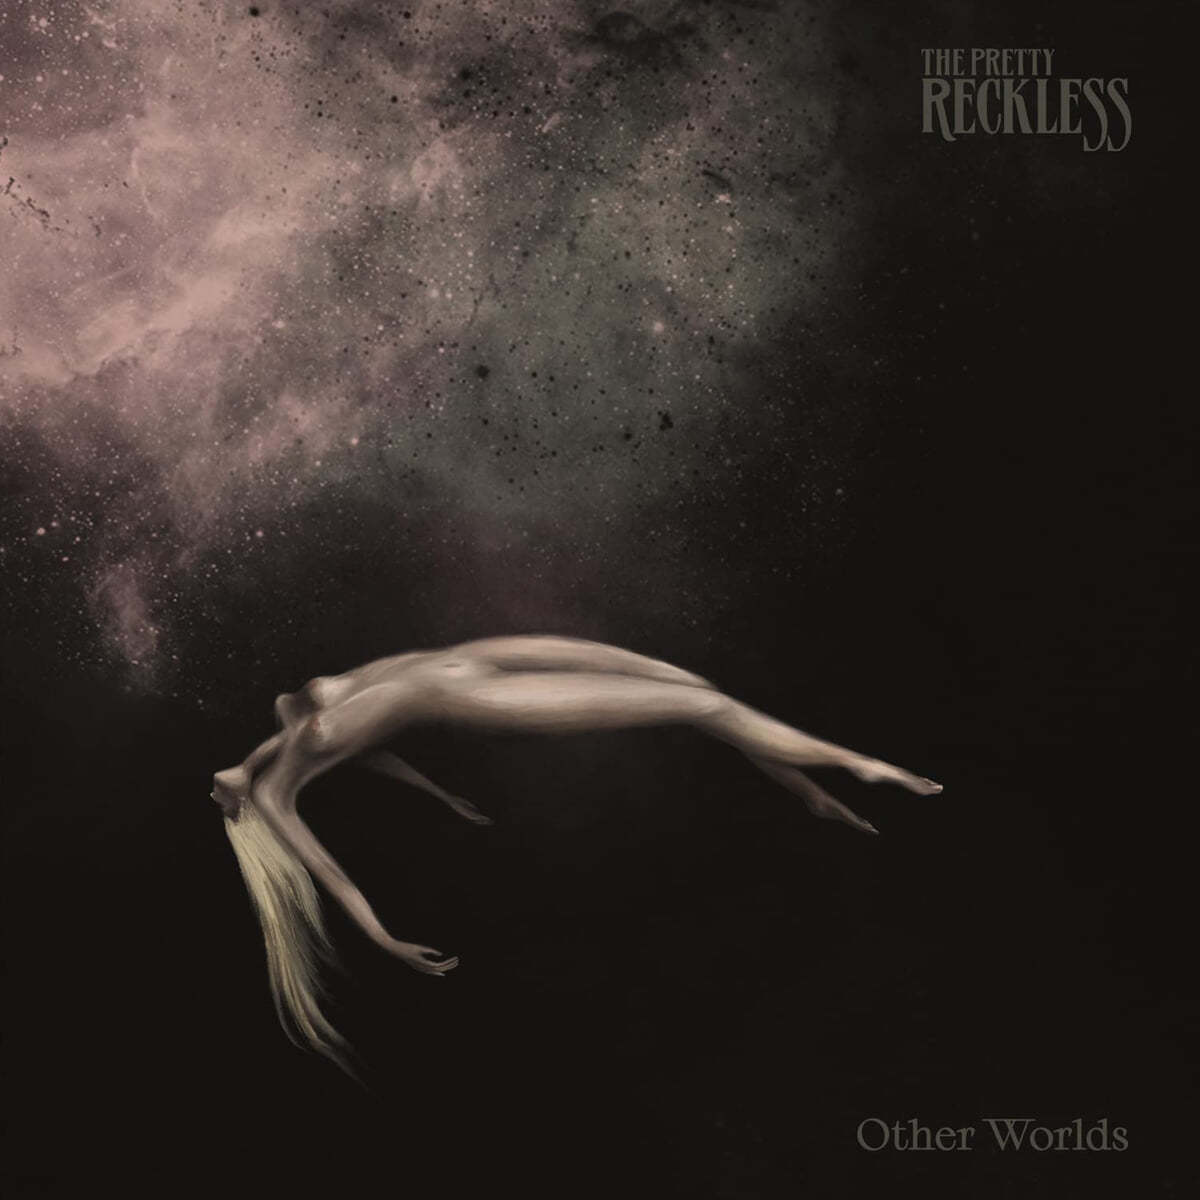 The Pretty Reckless (더 프리티 레클레스) - Other Worlds